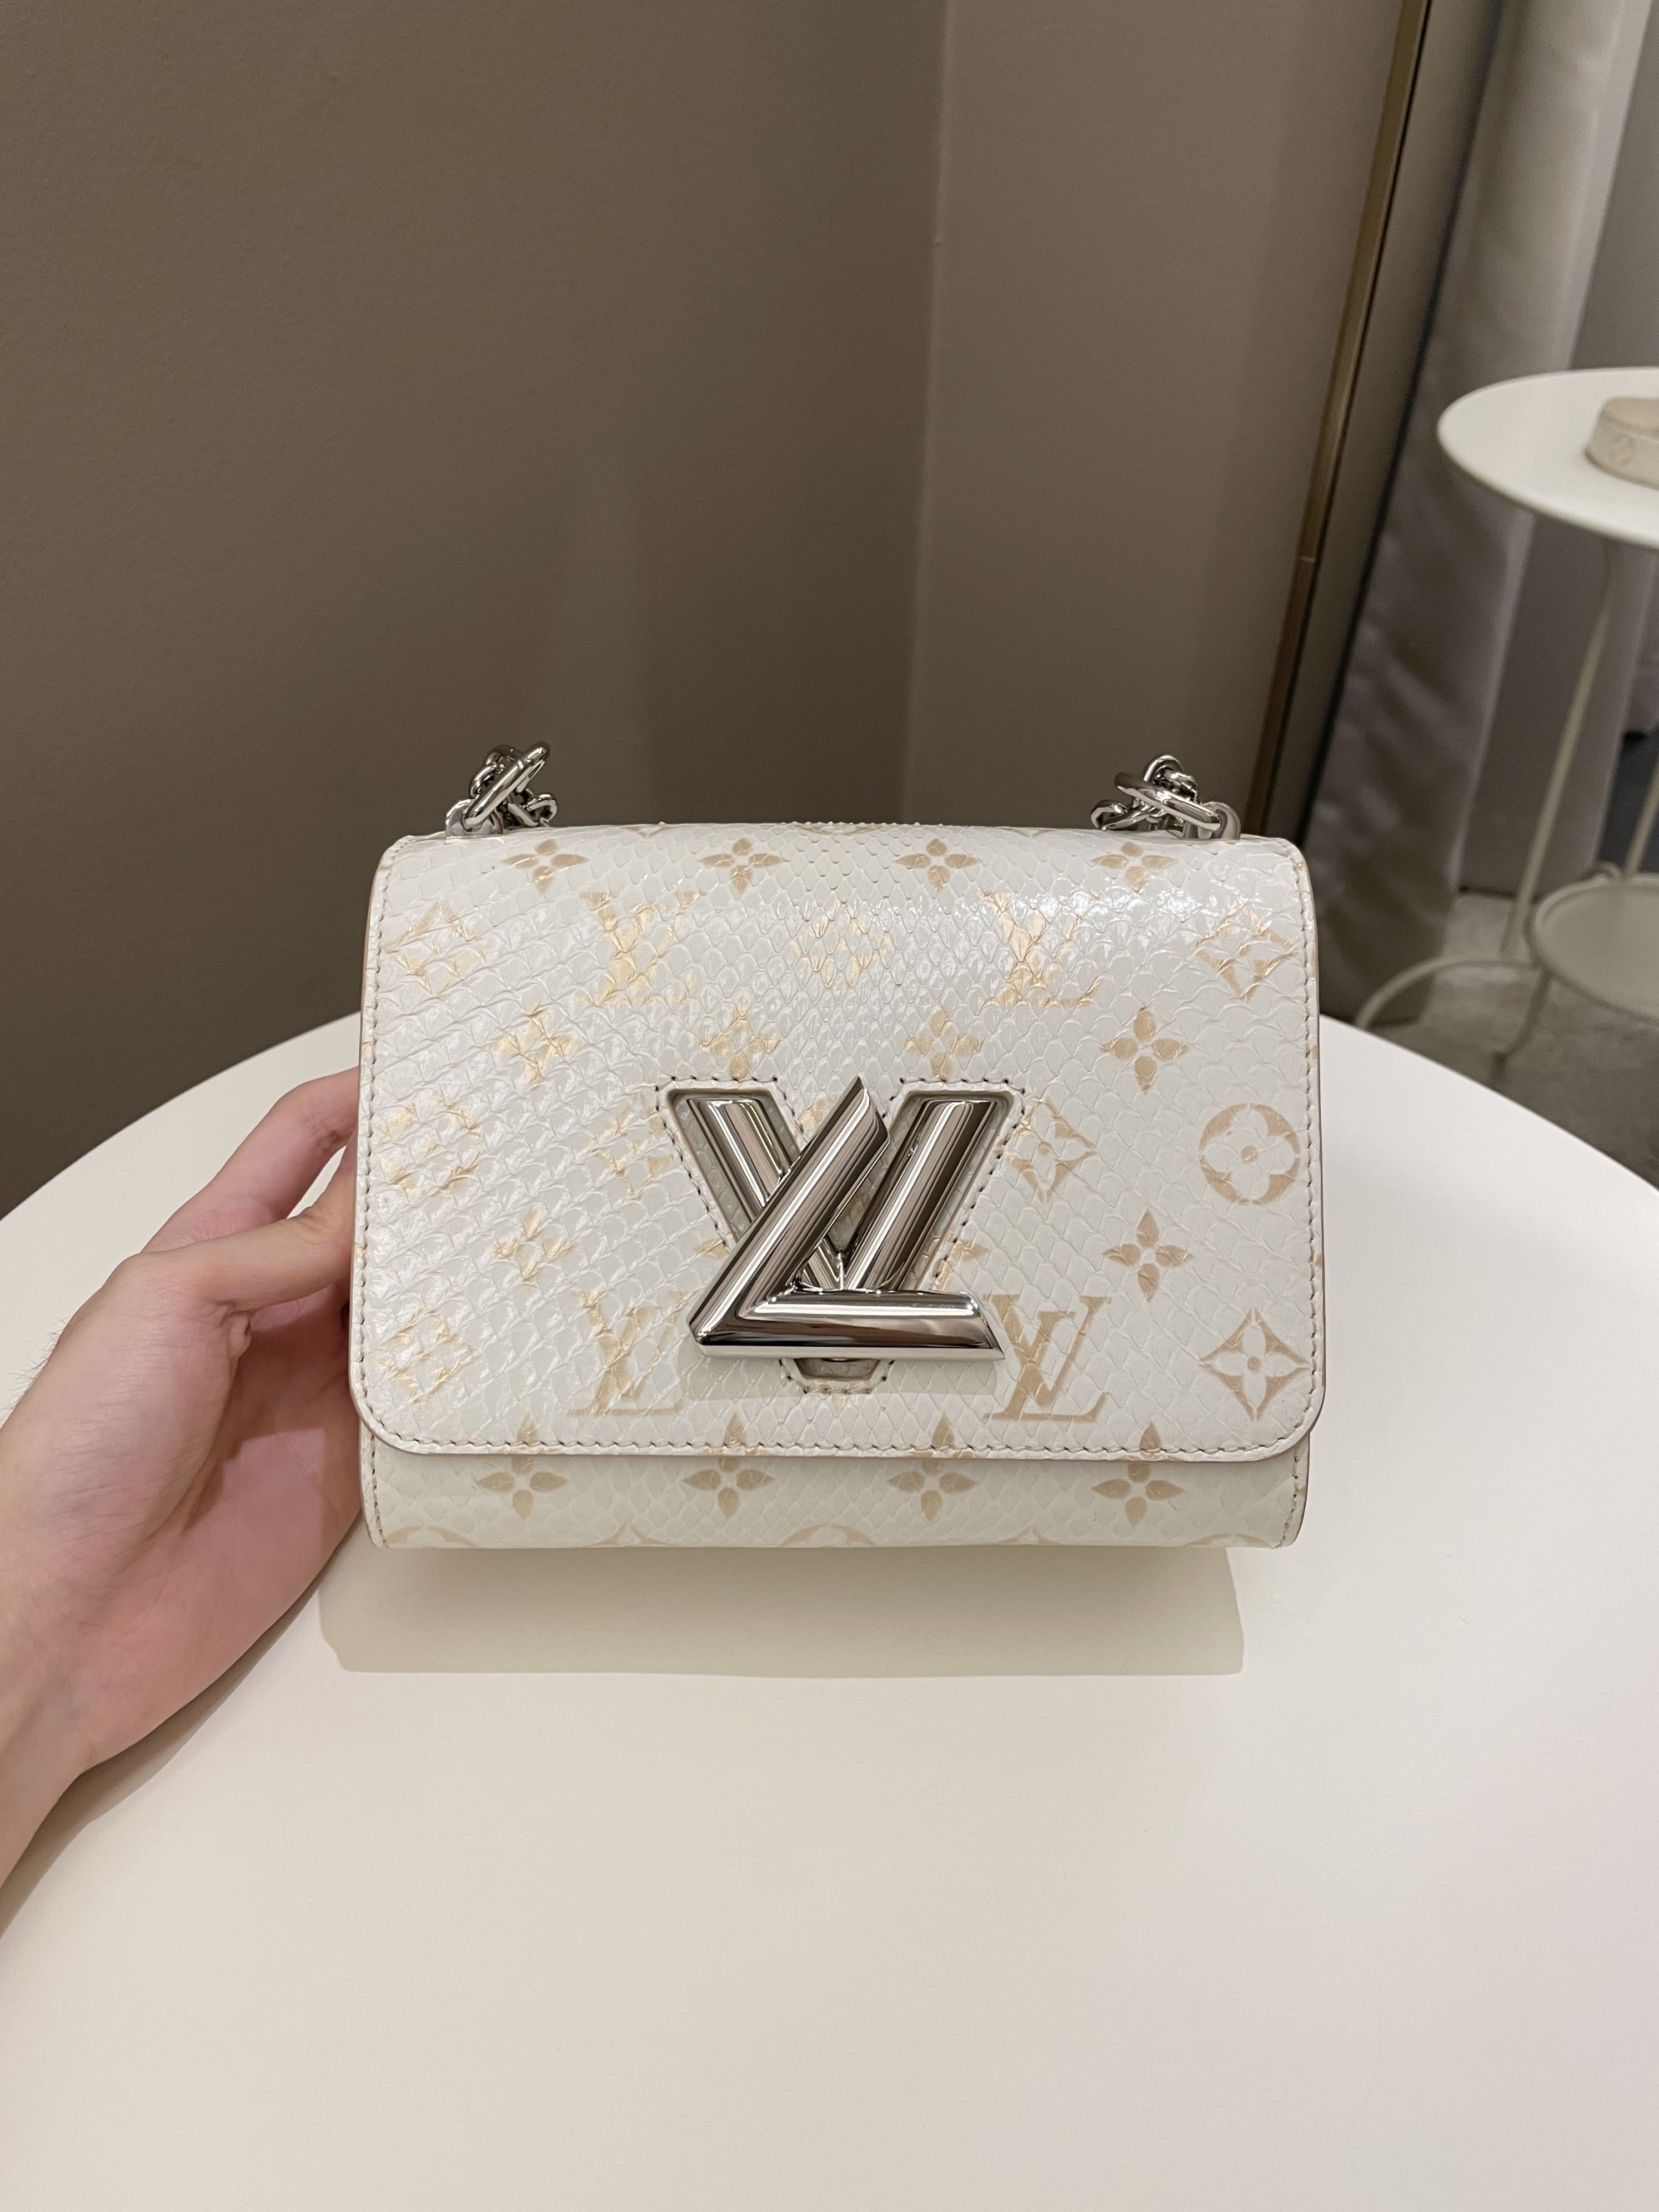 Louis Vuitton Twist Bag Review and What Fits Inside 